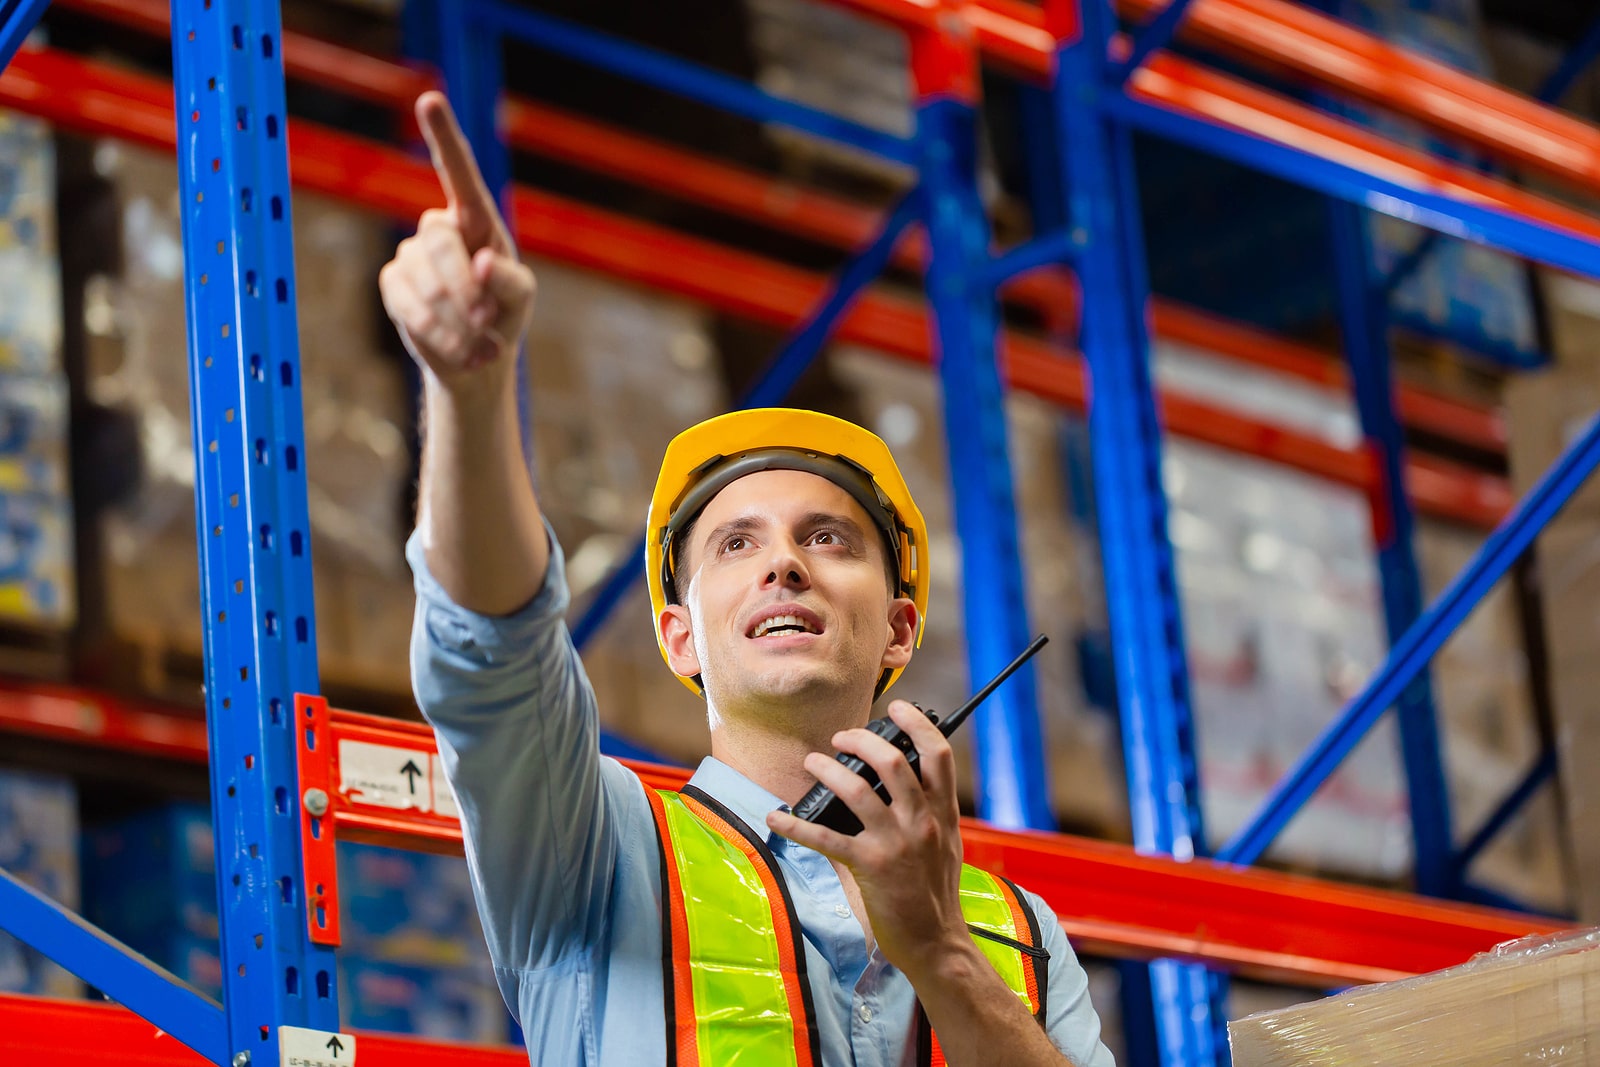 Image of a person working in a shipping and logistics warehouse